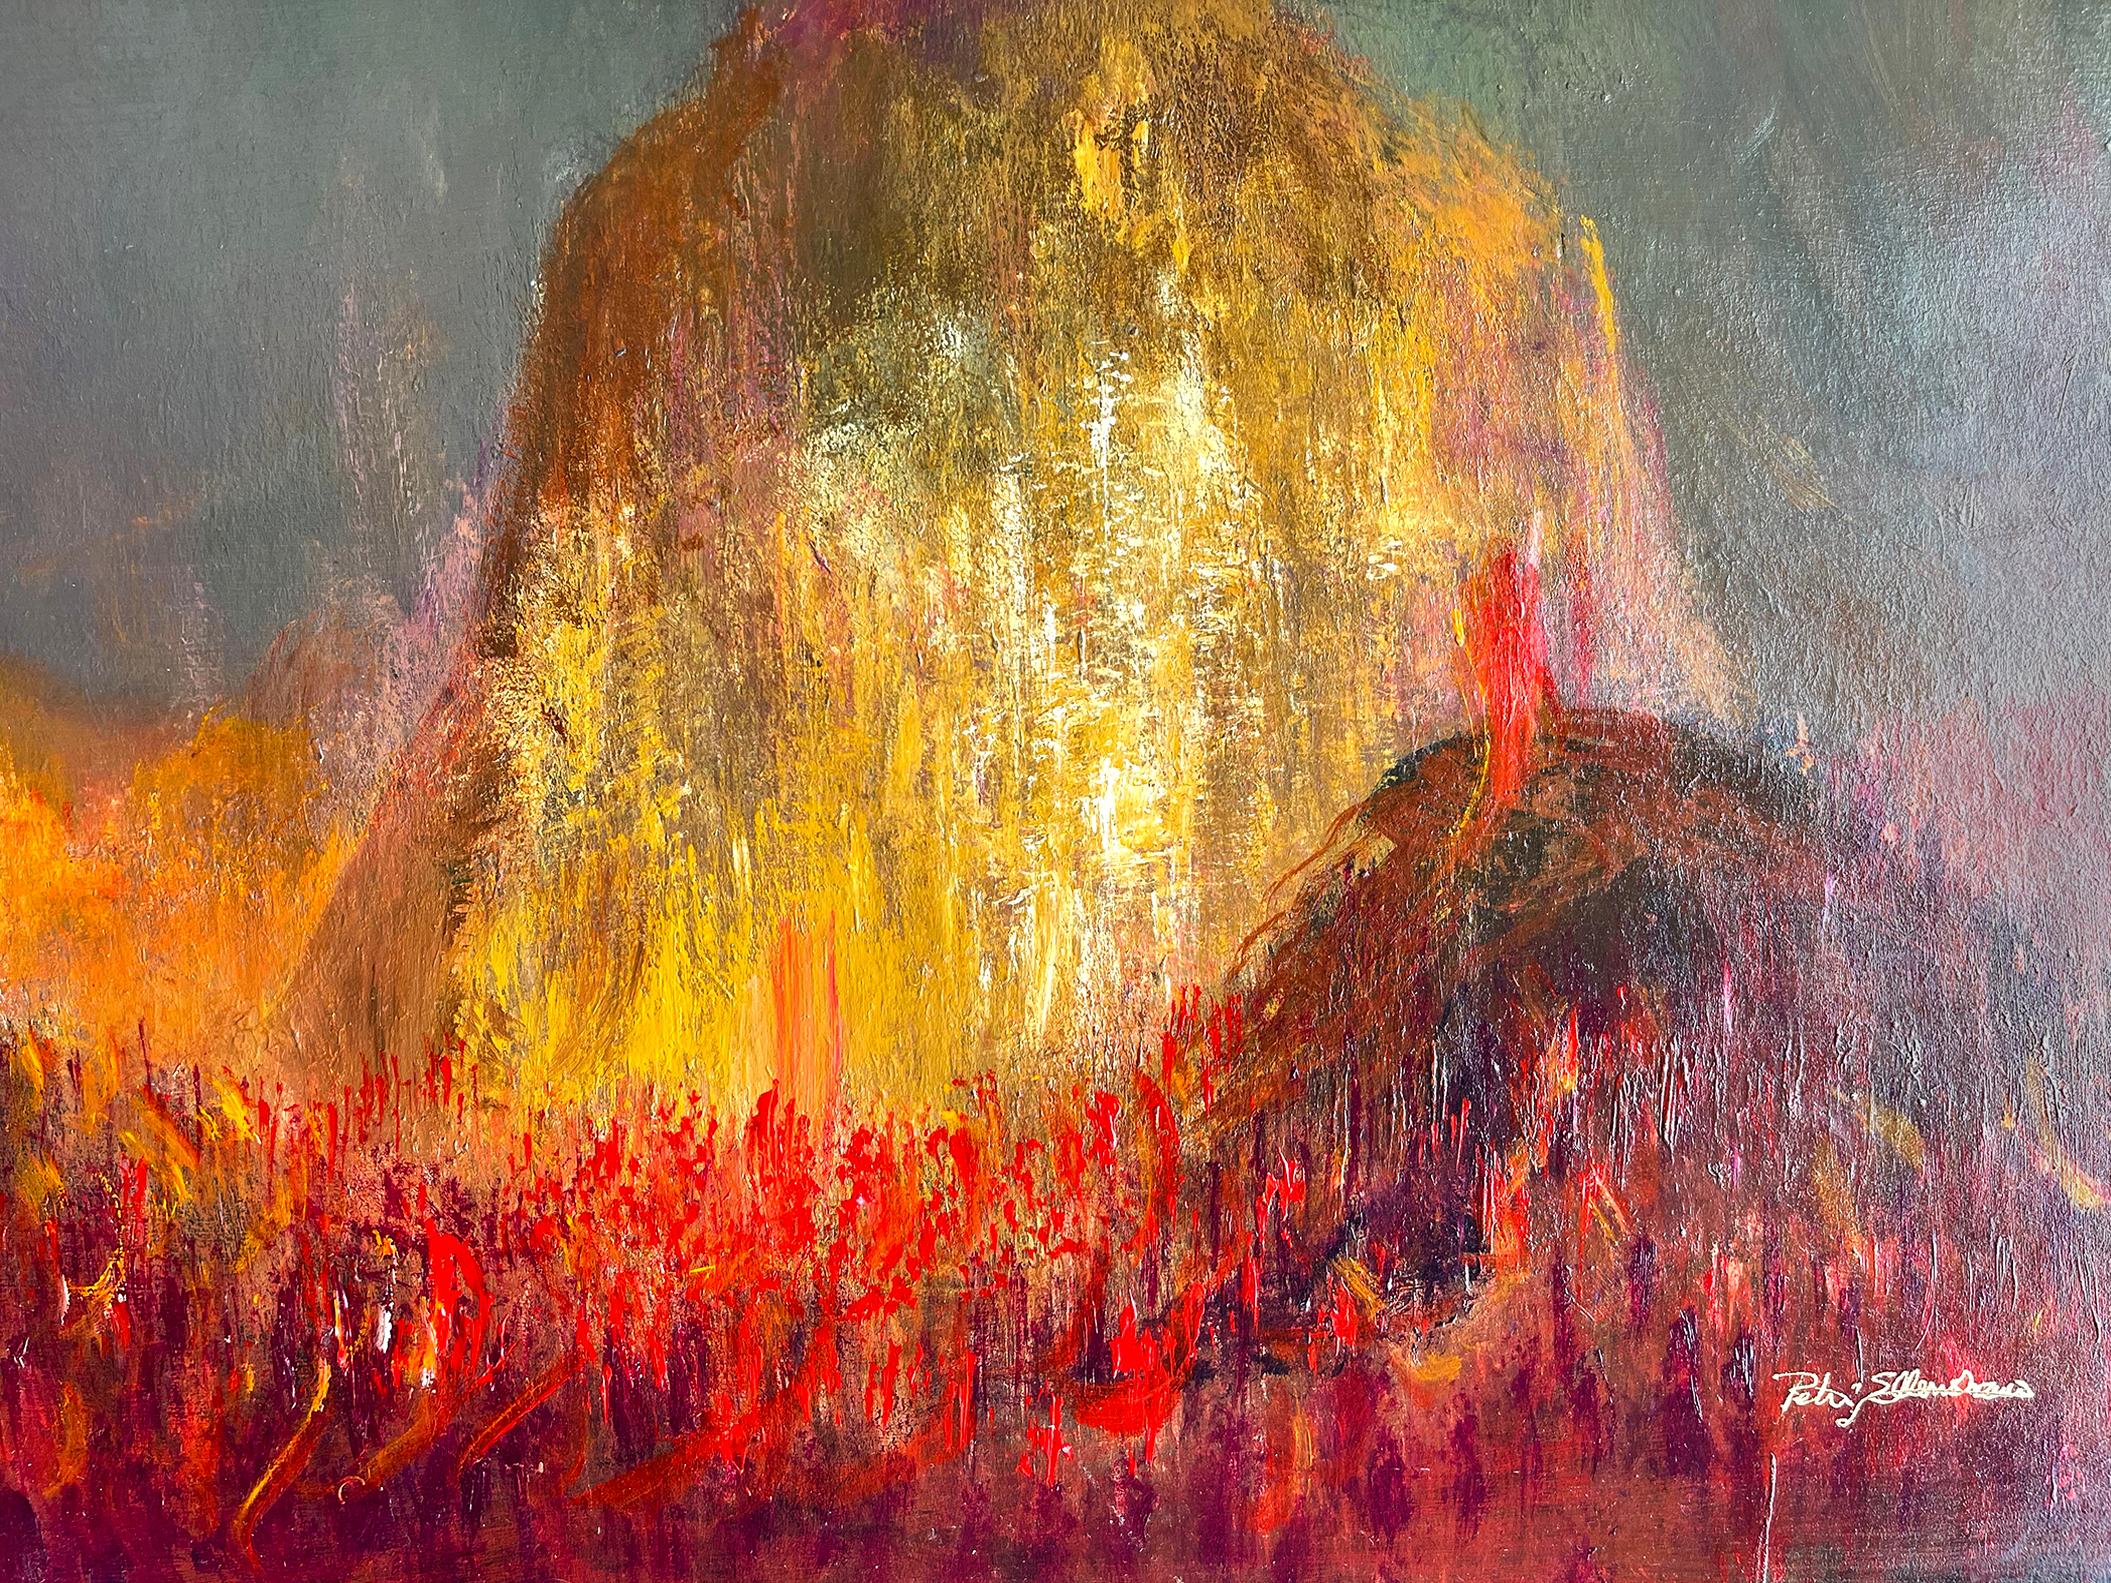 Volcano Eruption - Explosive Fire Lava Flow from Hell - Painting by Peter Ellenshaw